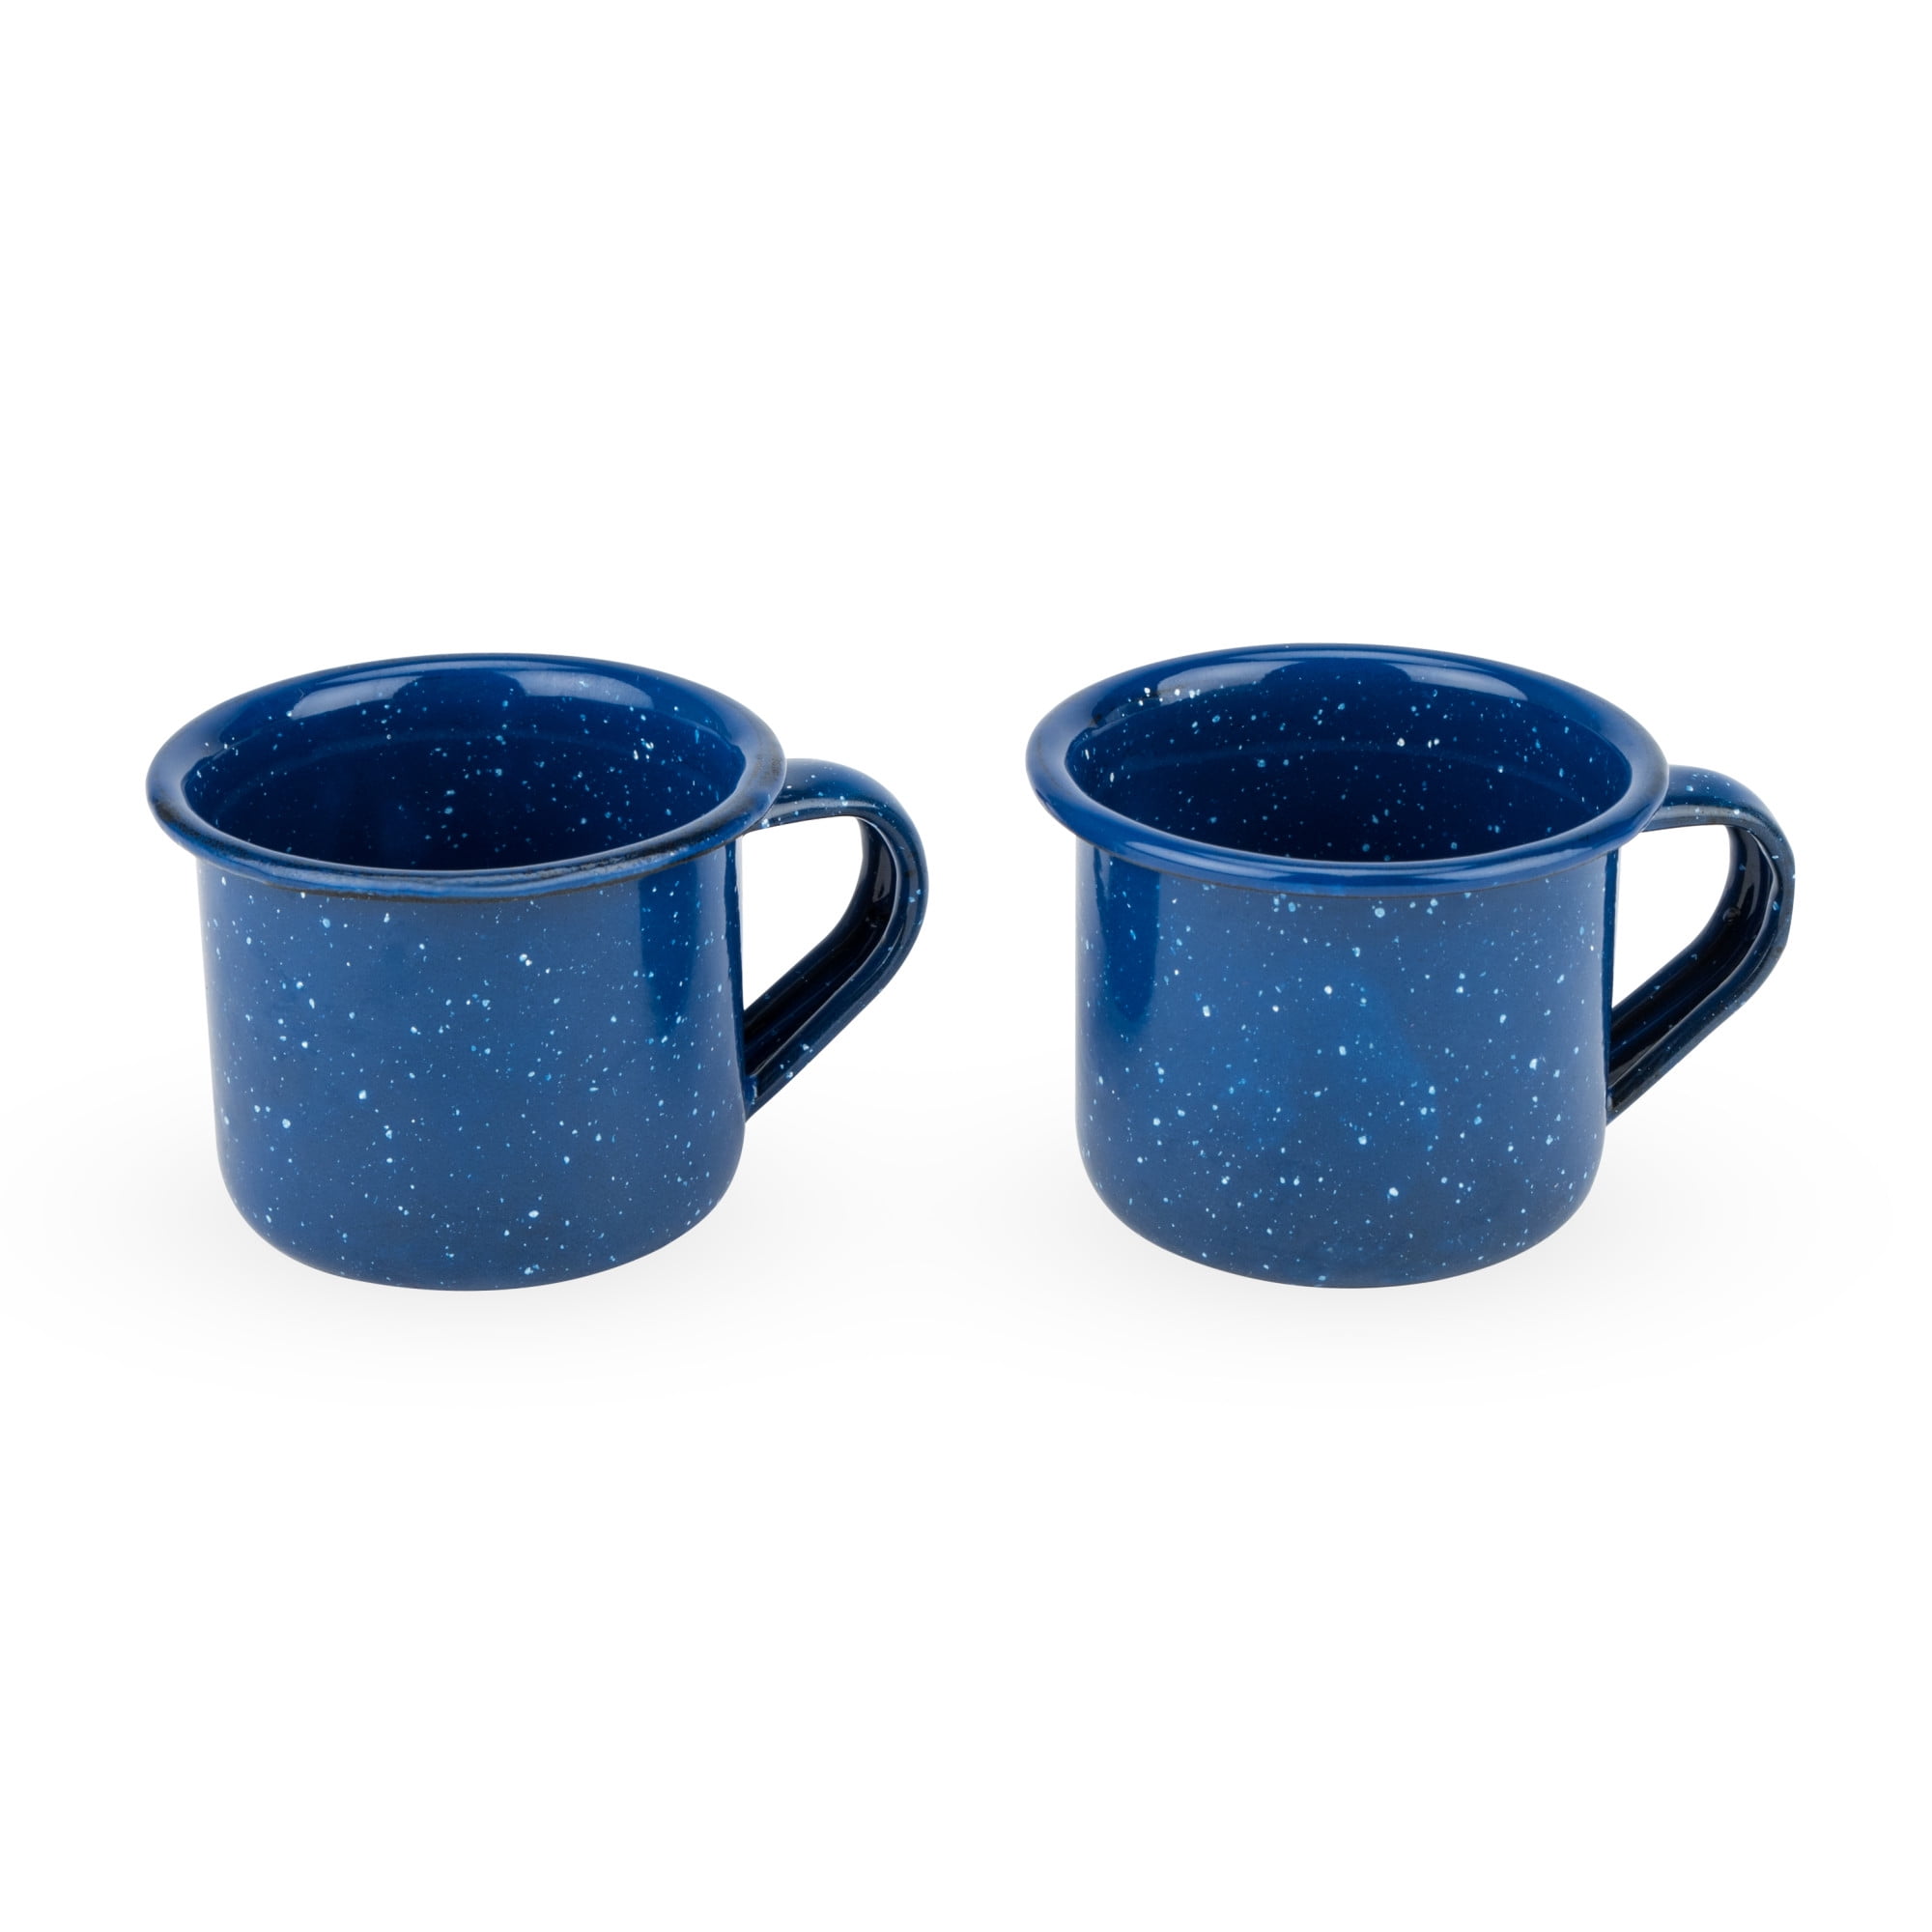 Double Wall Espresso Cups Set - Insulated Coffee Shot Glasses - 2.6oz, Set of 4 - Demitasse Gift